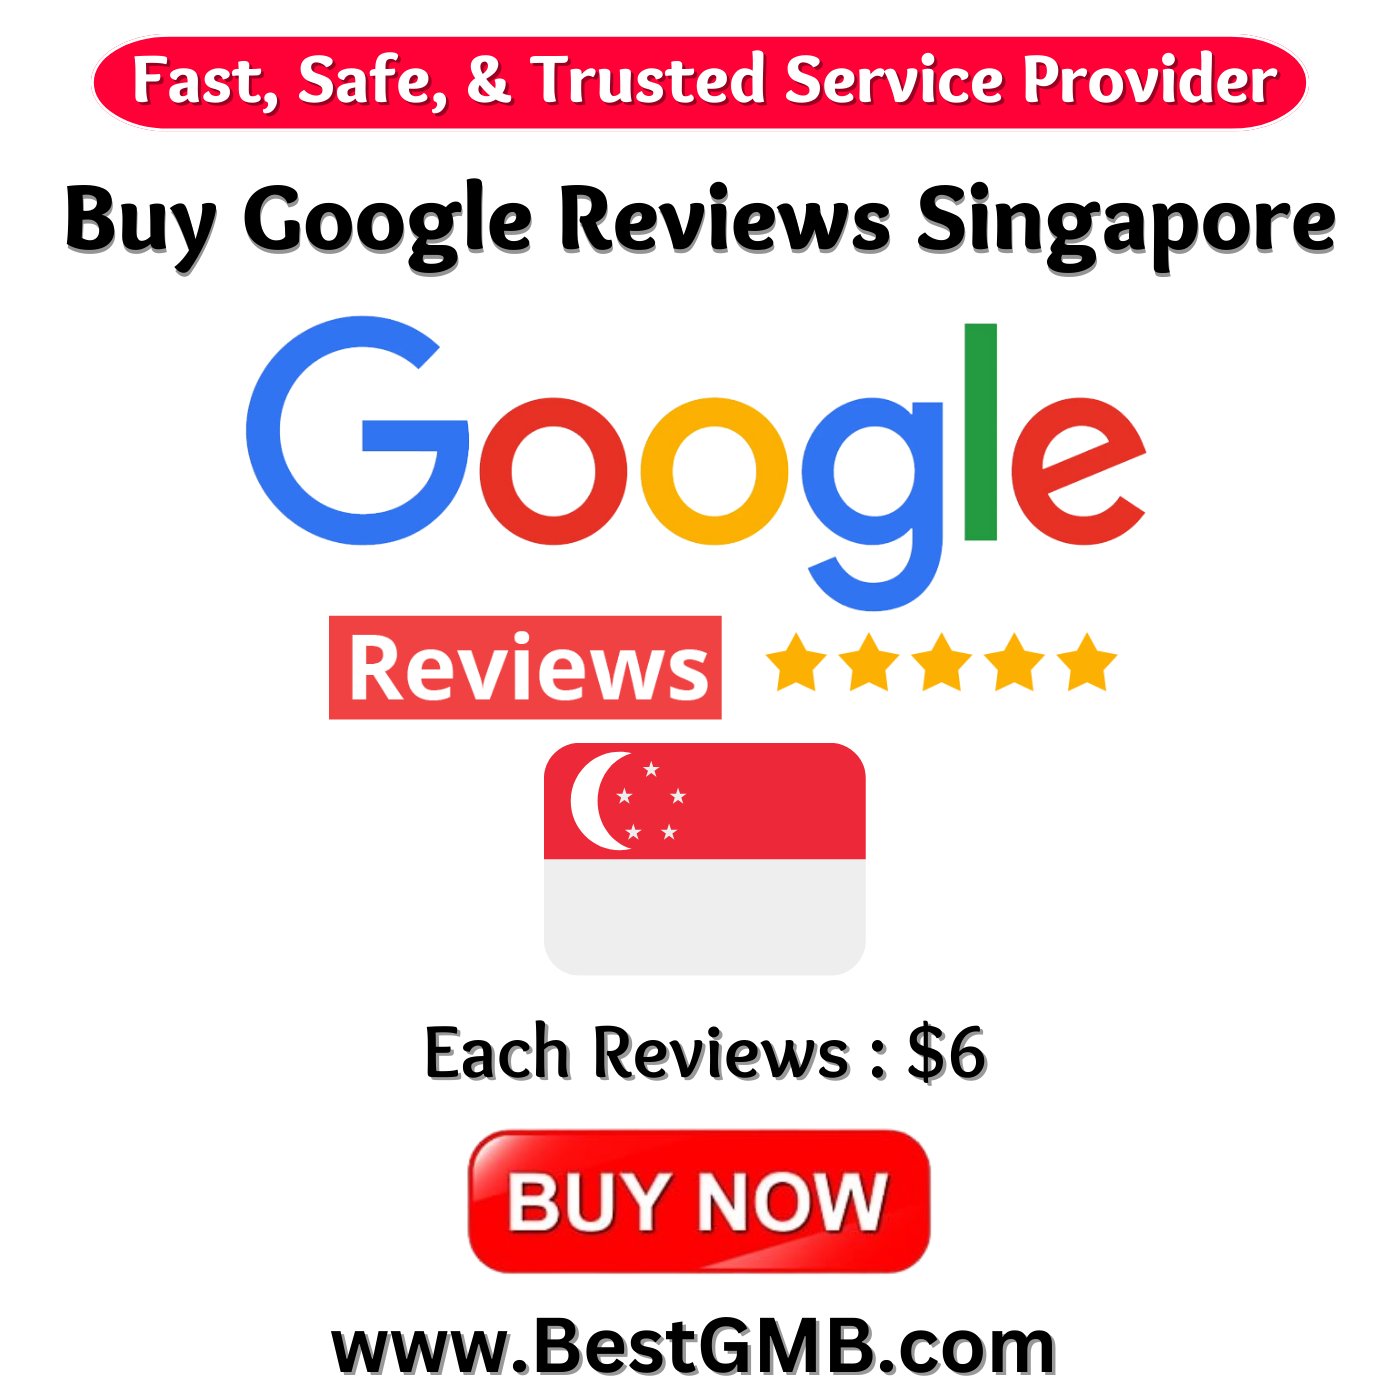 Buy Google Reviews Singapore - Fast , Safe & Trusted